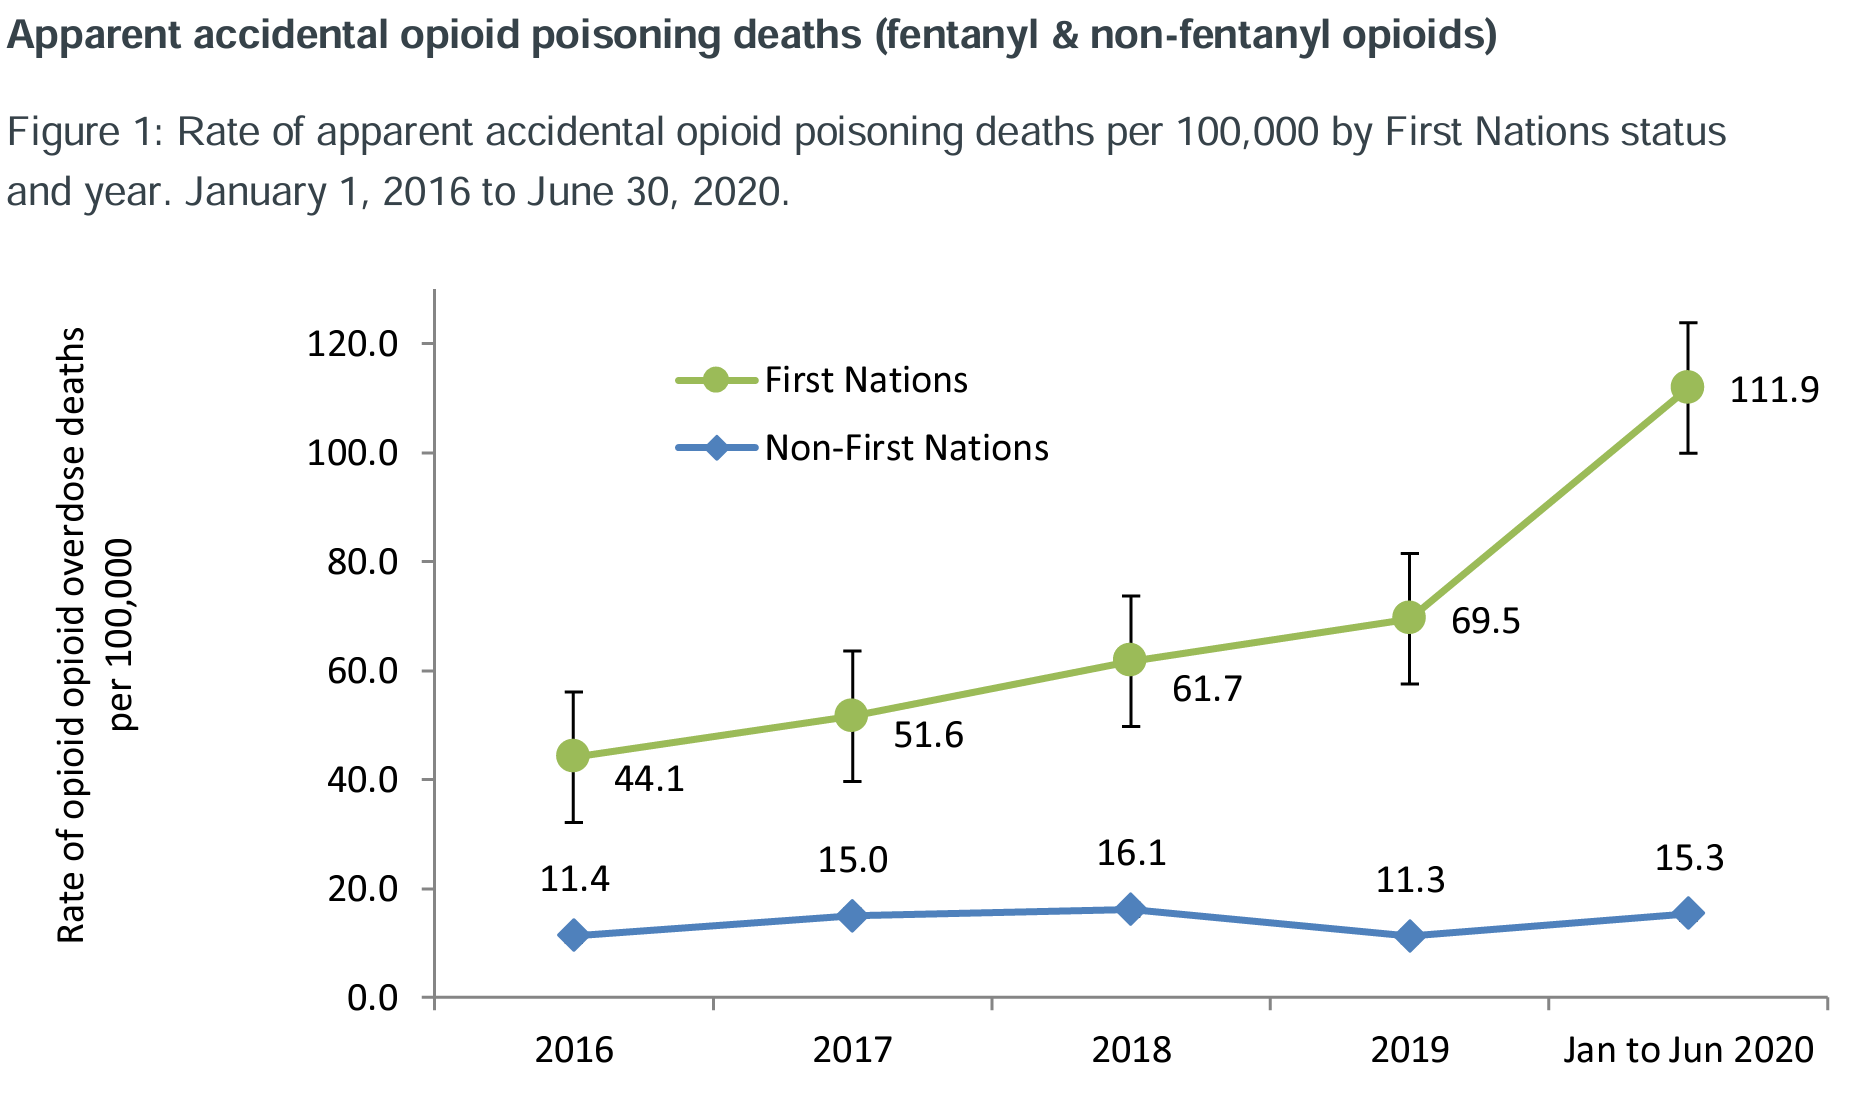 Graph showing rate of opioid overdose deaths per 100,000 population from 2016 to the first half of 2020. Among non-First Nations people, the deaths remained at 16 per 100,000 or below in all years. Among First Nations people, deaths grew every year from 44 per 100,000 in 2016 to 70 per 100,000 in 2019 to 112 per 100,000 in 2020.